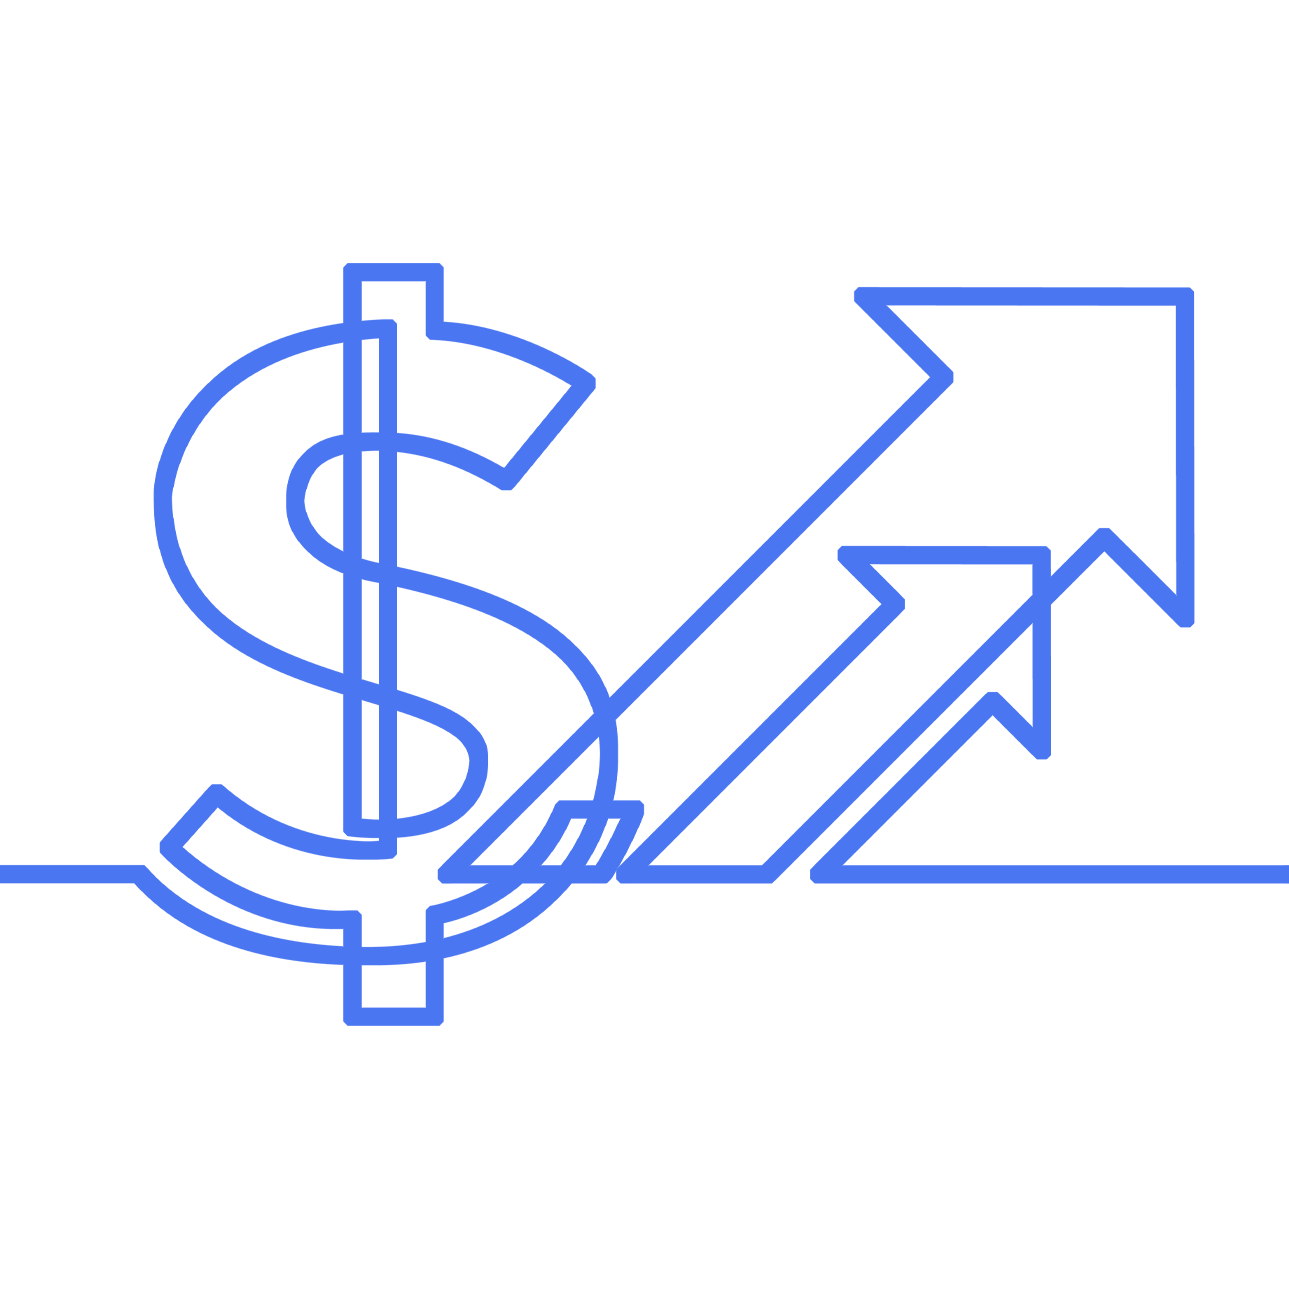 Dollar sign icon for financial industry recruiting